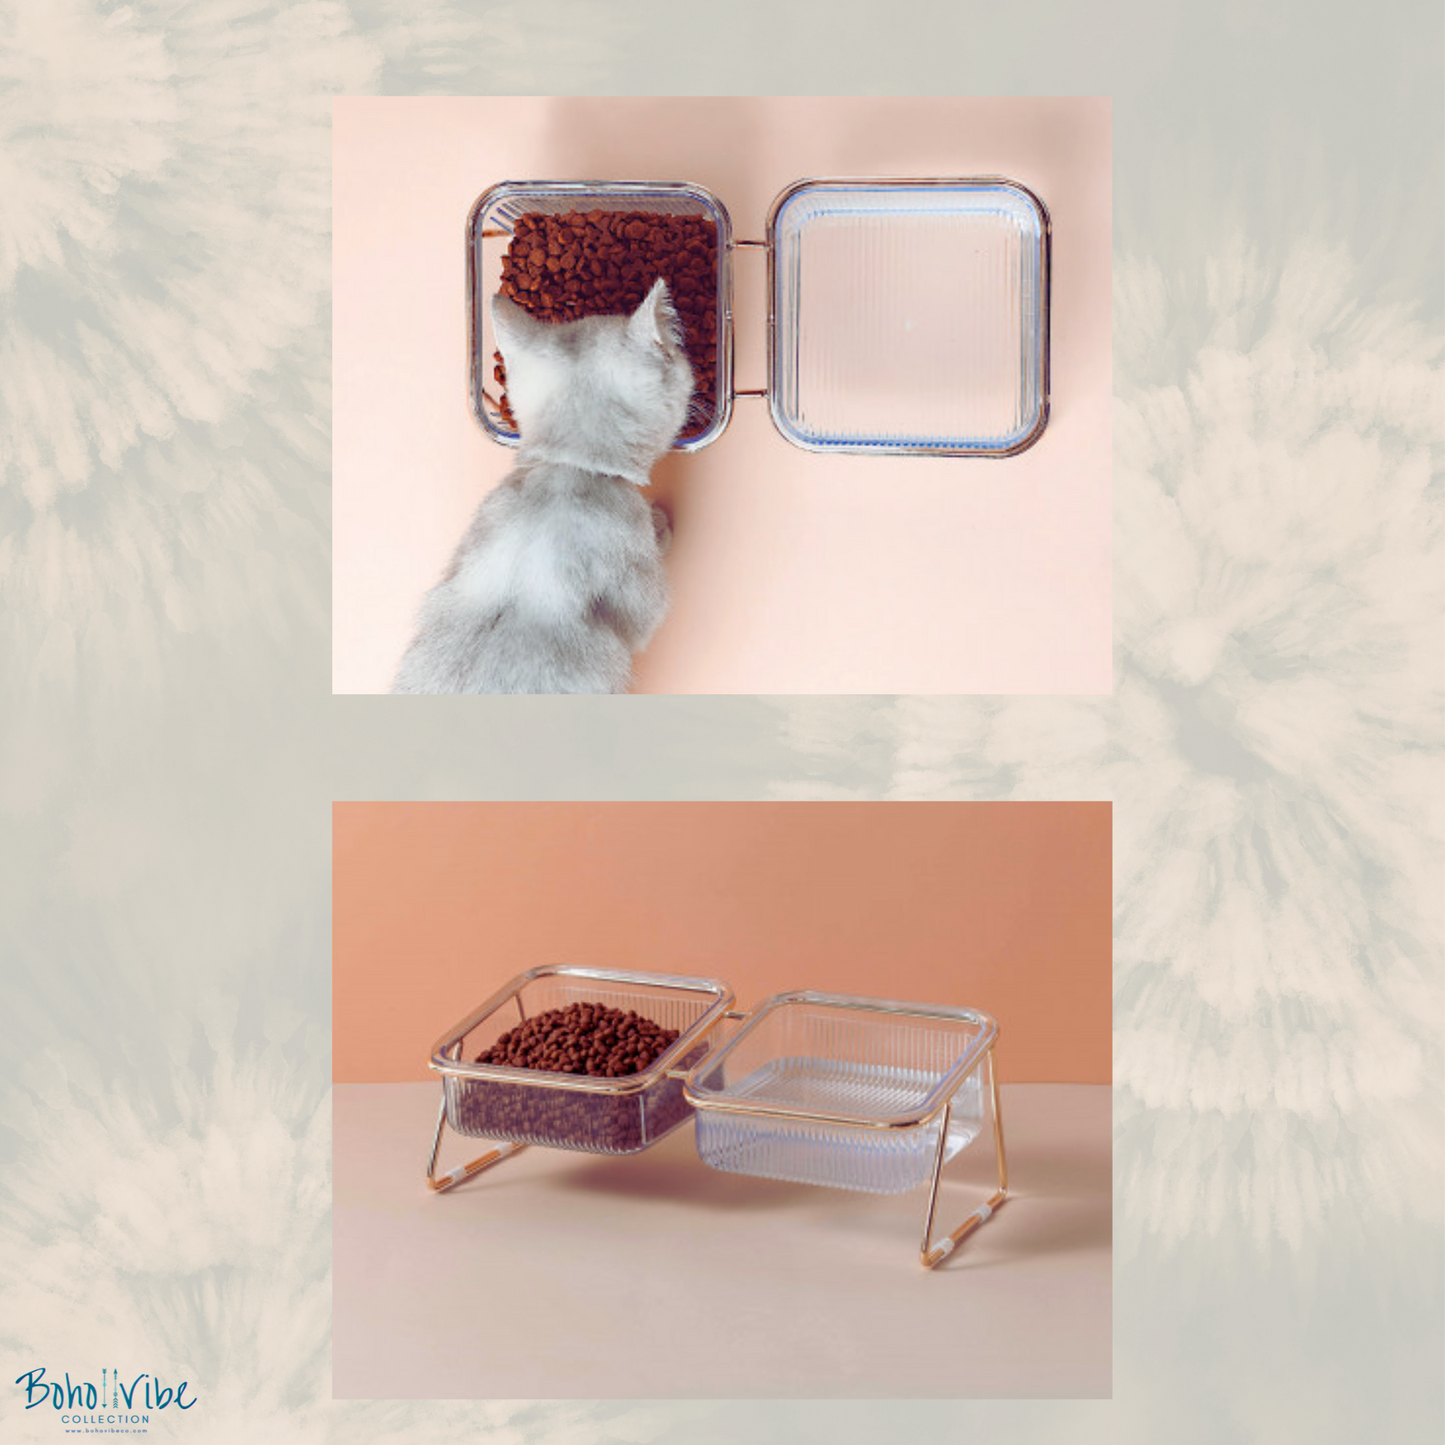 Boho ↡↟ Vibe Collection ↠ Pet Dog Cat Double Food Water Bowls Transparent Gold Kitten Puppy Feeding Dishes